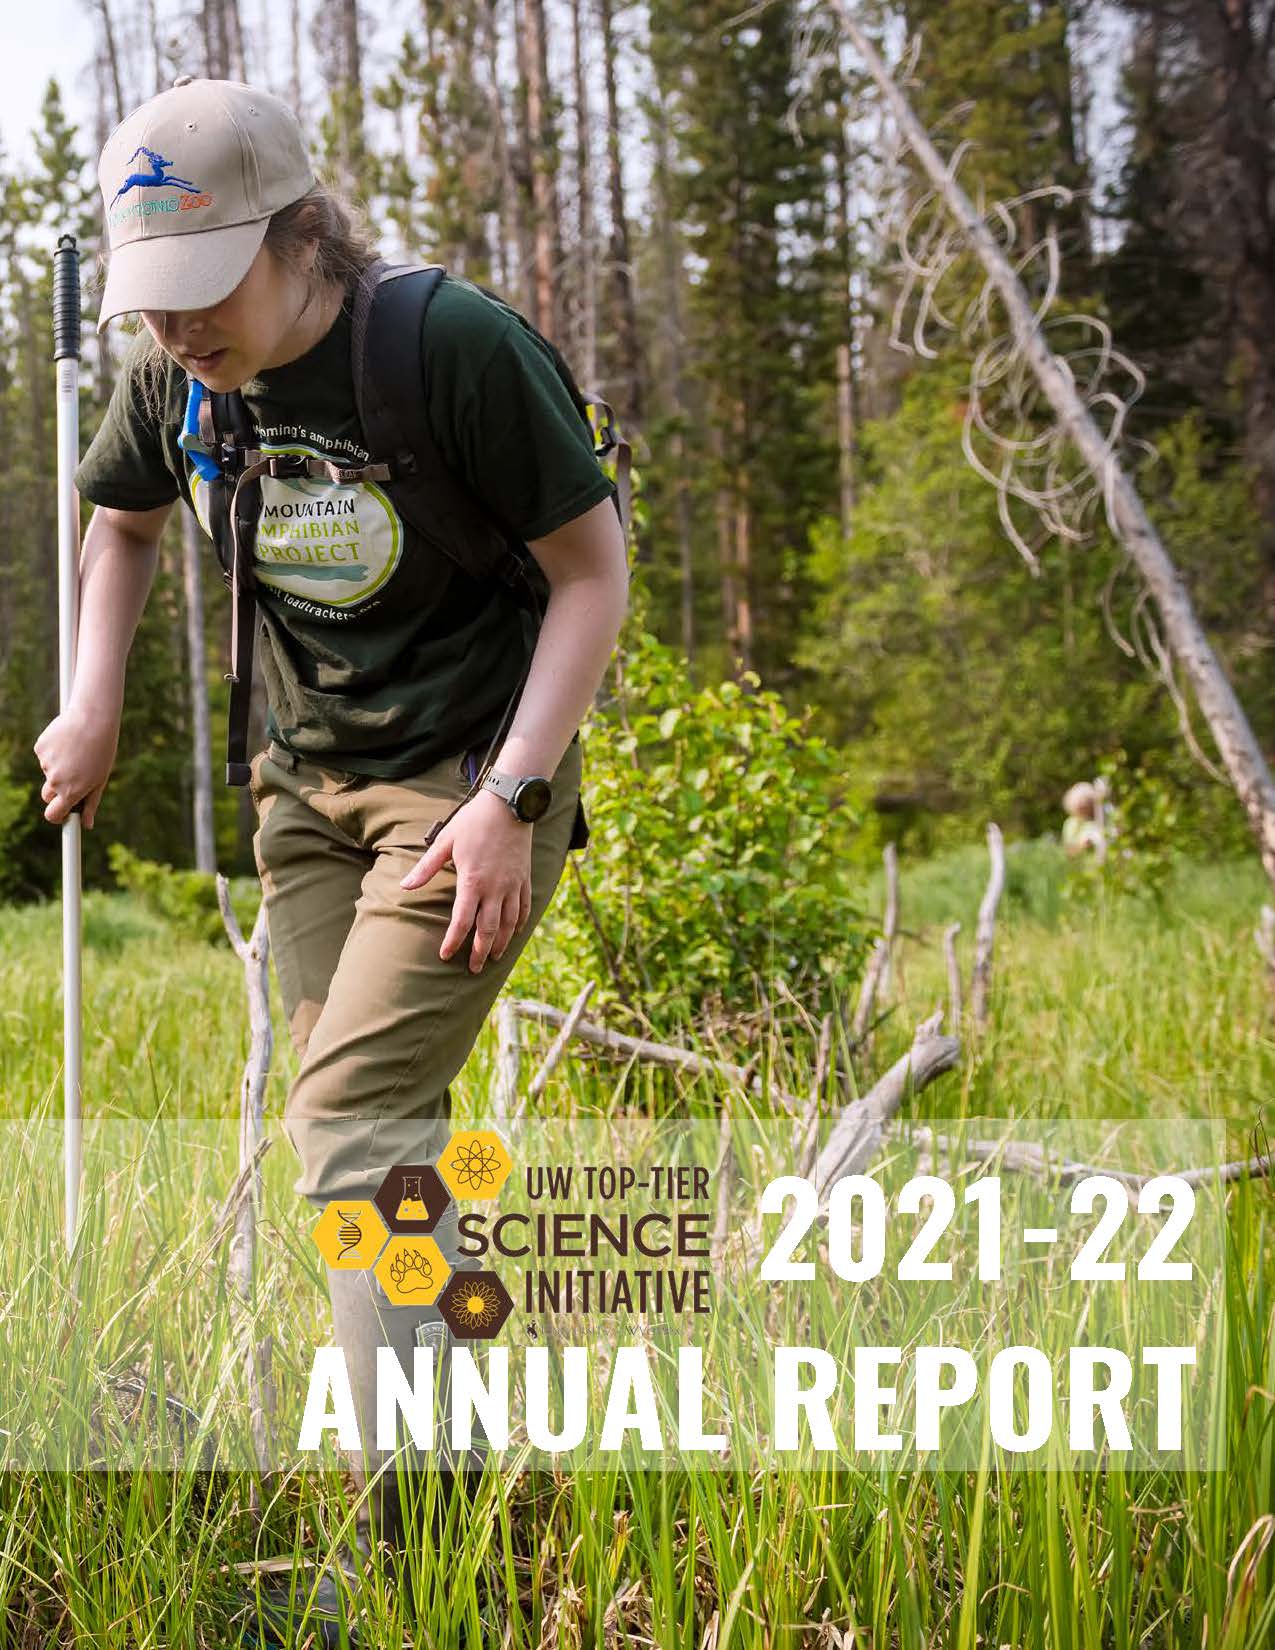 Front page of Si Annual Report 2021-22 Student doing research in alpine environment